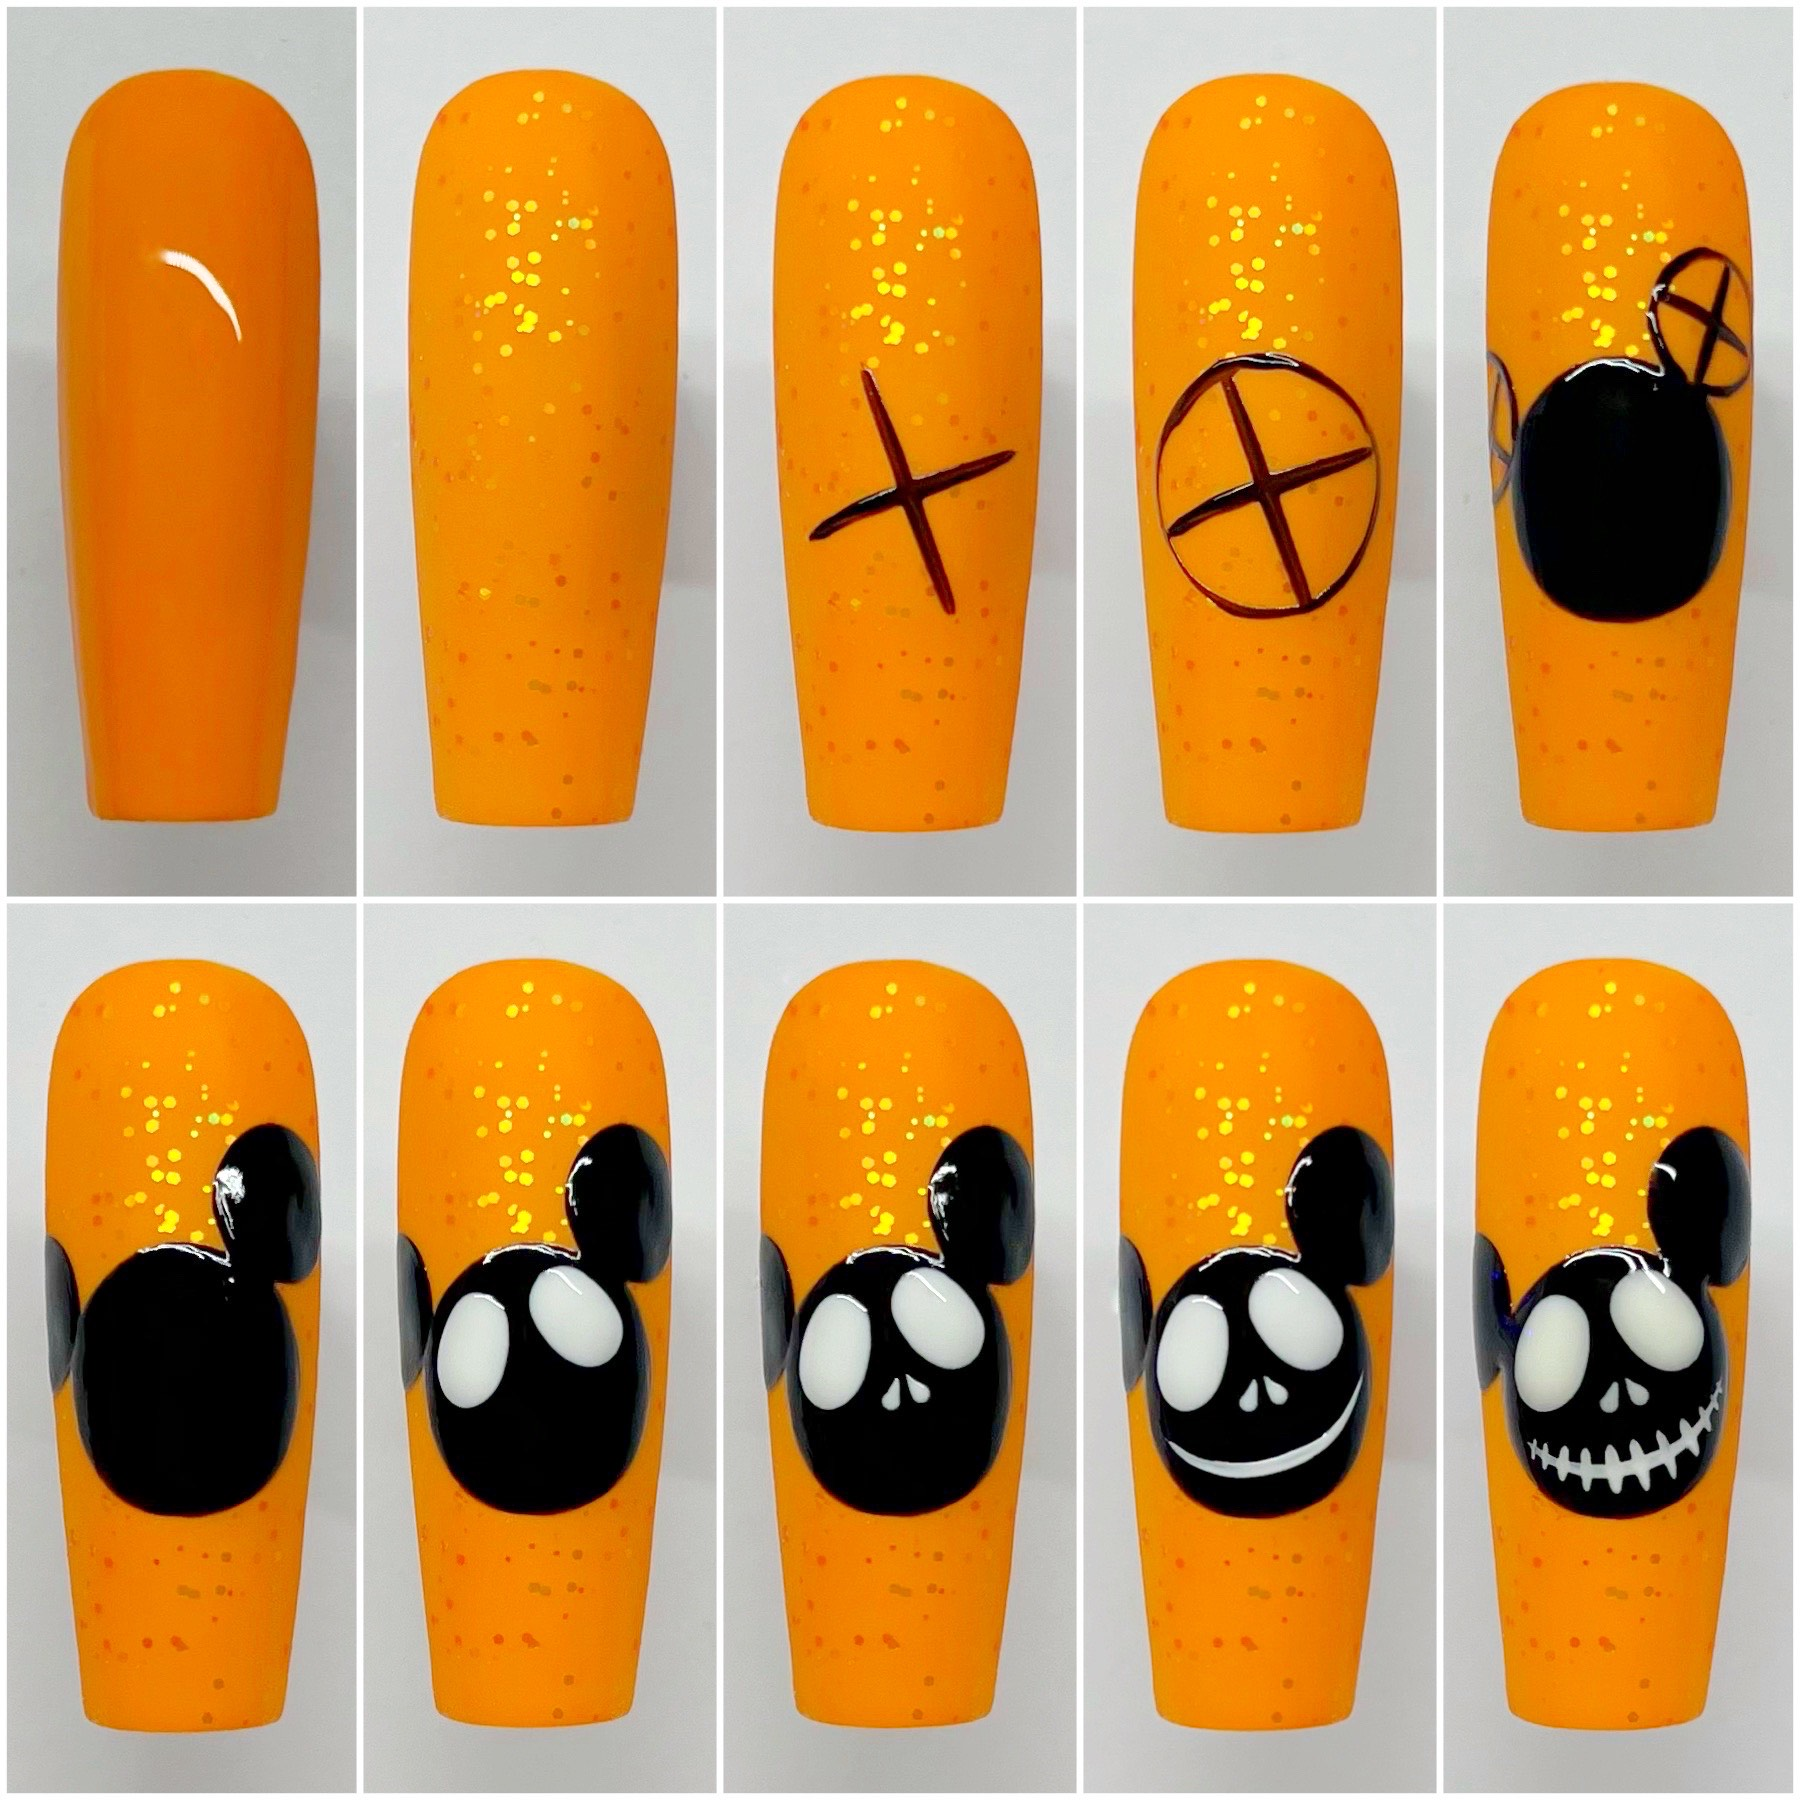 Nail Art Sticker Popular Cartoon Brand Mickey Mouse Nails for Manicure Back  Glue Decals for Design Foil Decoration - AliExpress